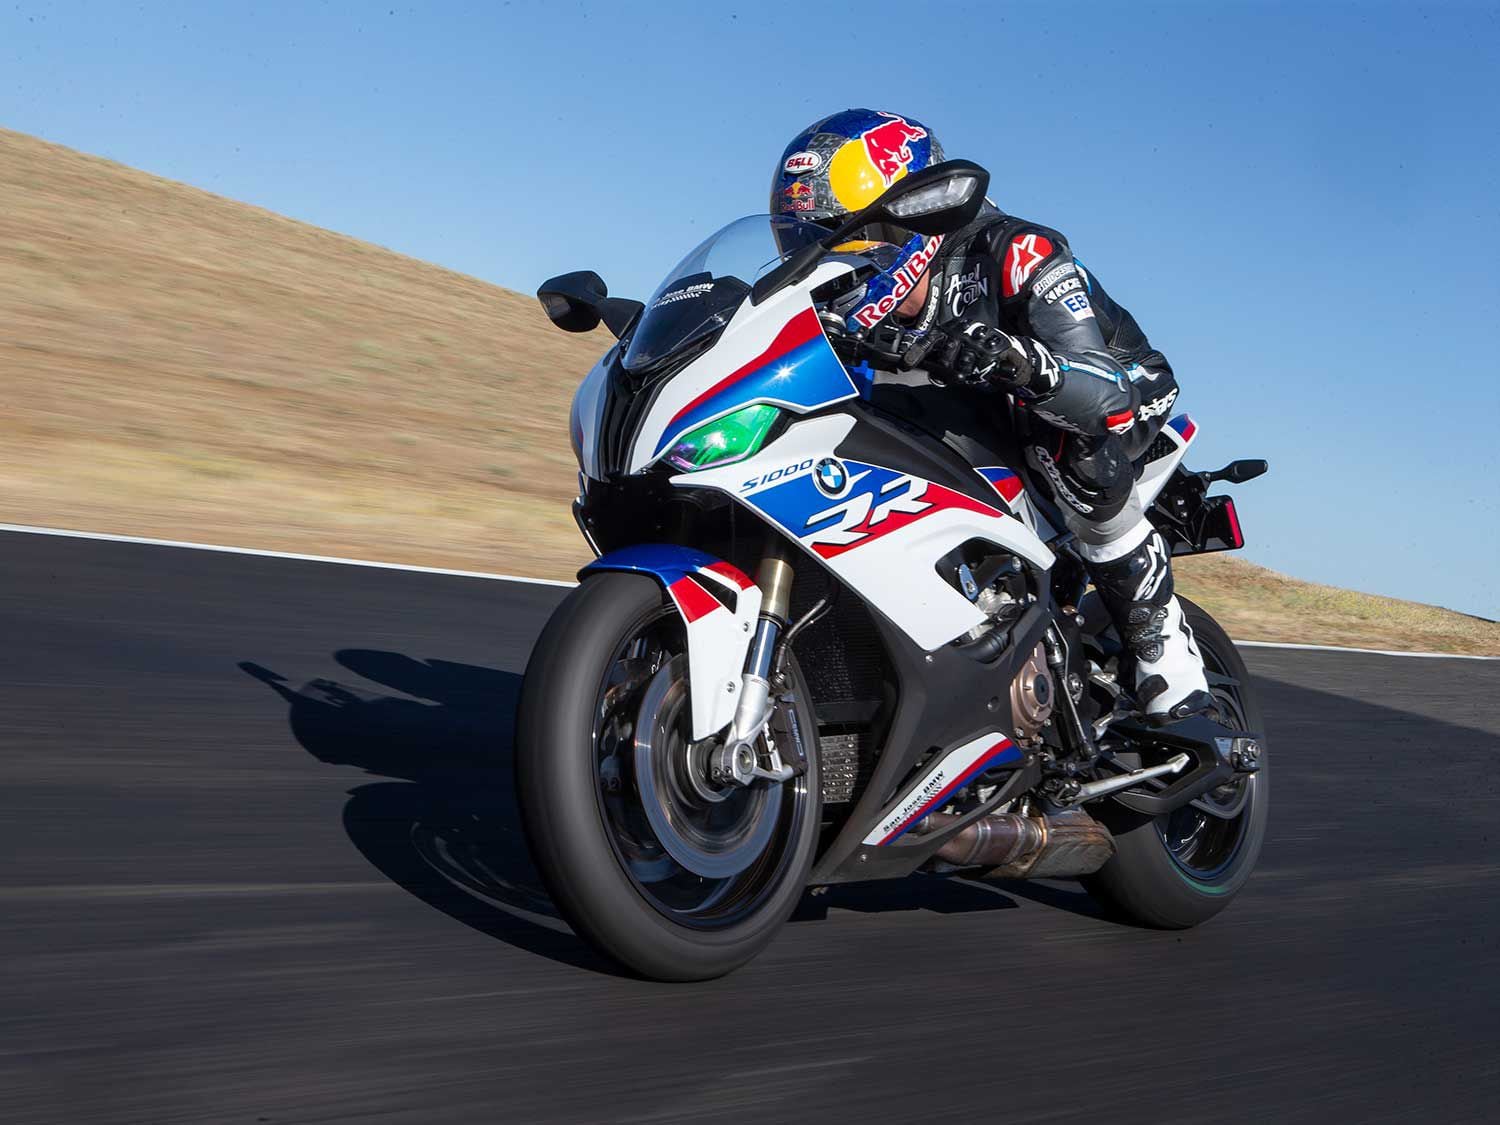 For more than a decade, BMW’s S 1000 RR has been one of the fastest production motorcycles you can buy.